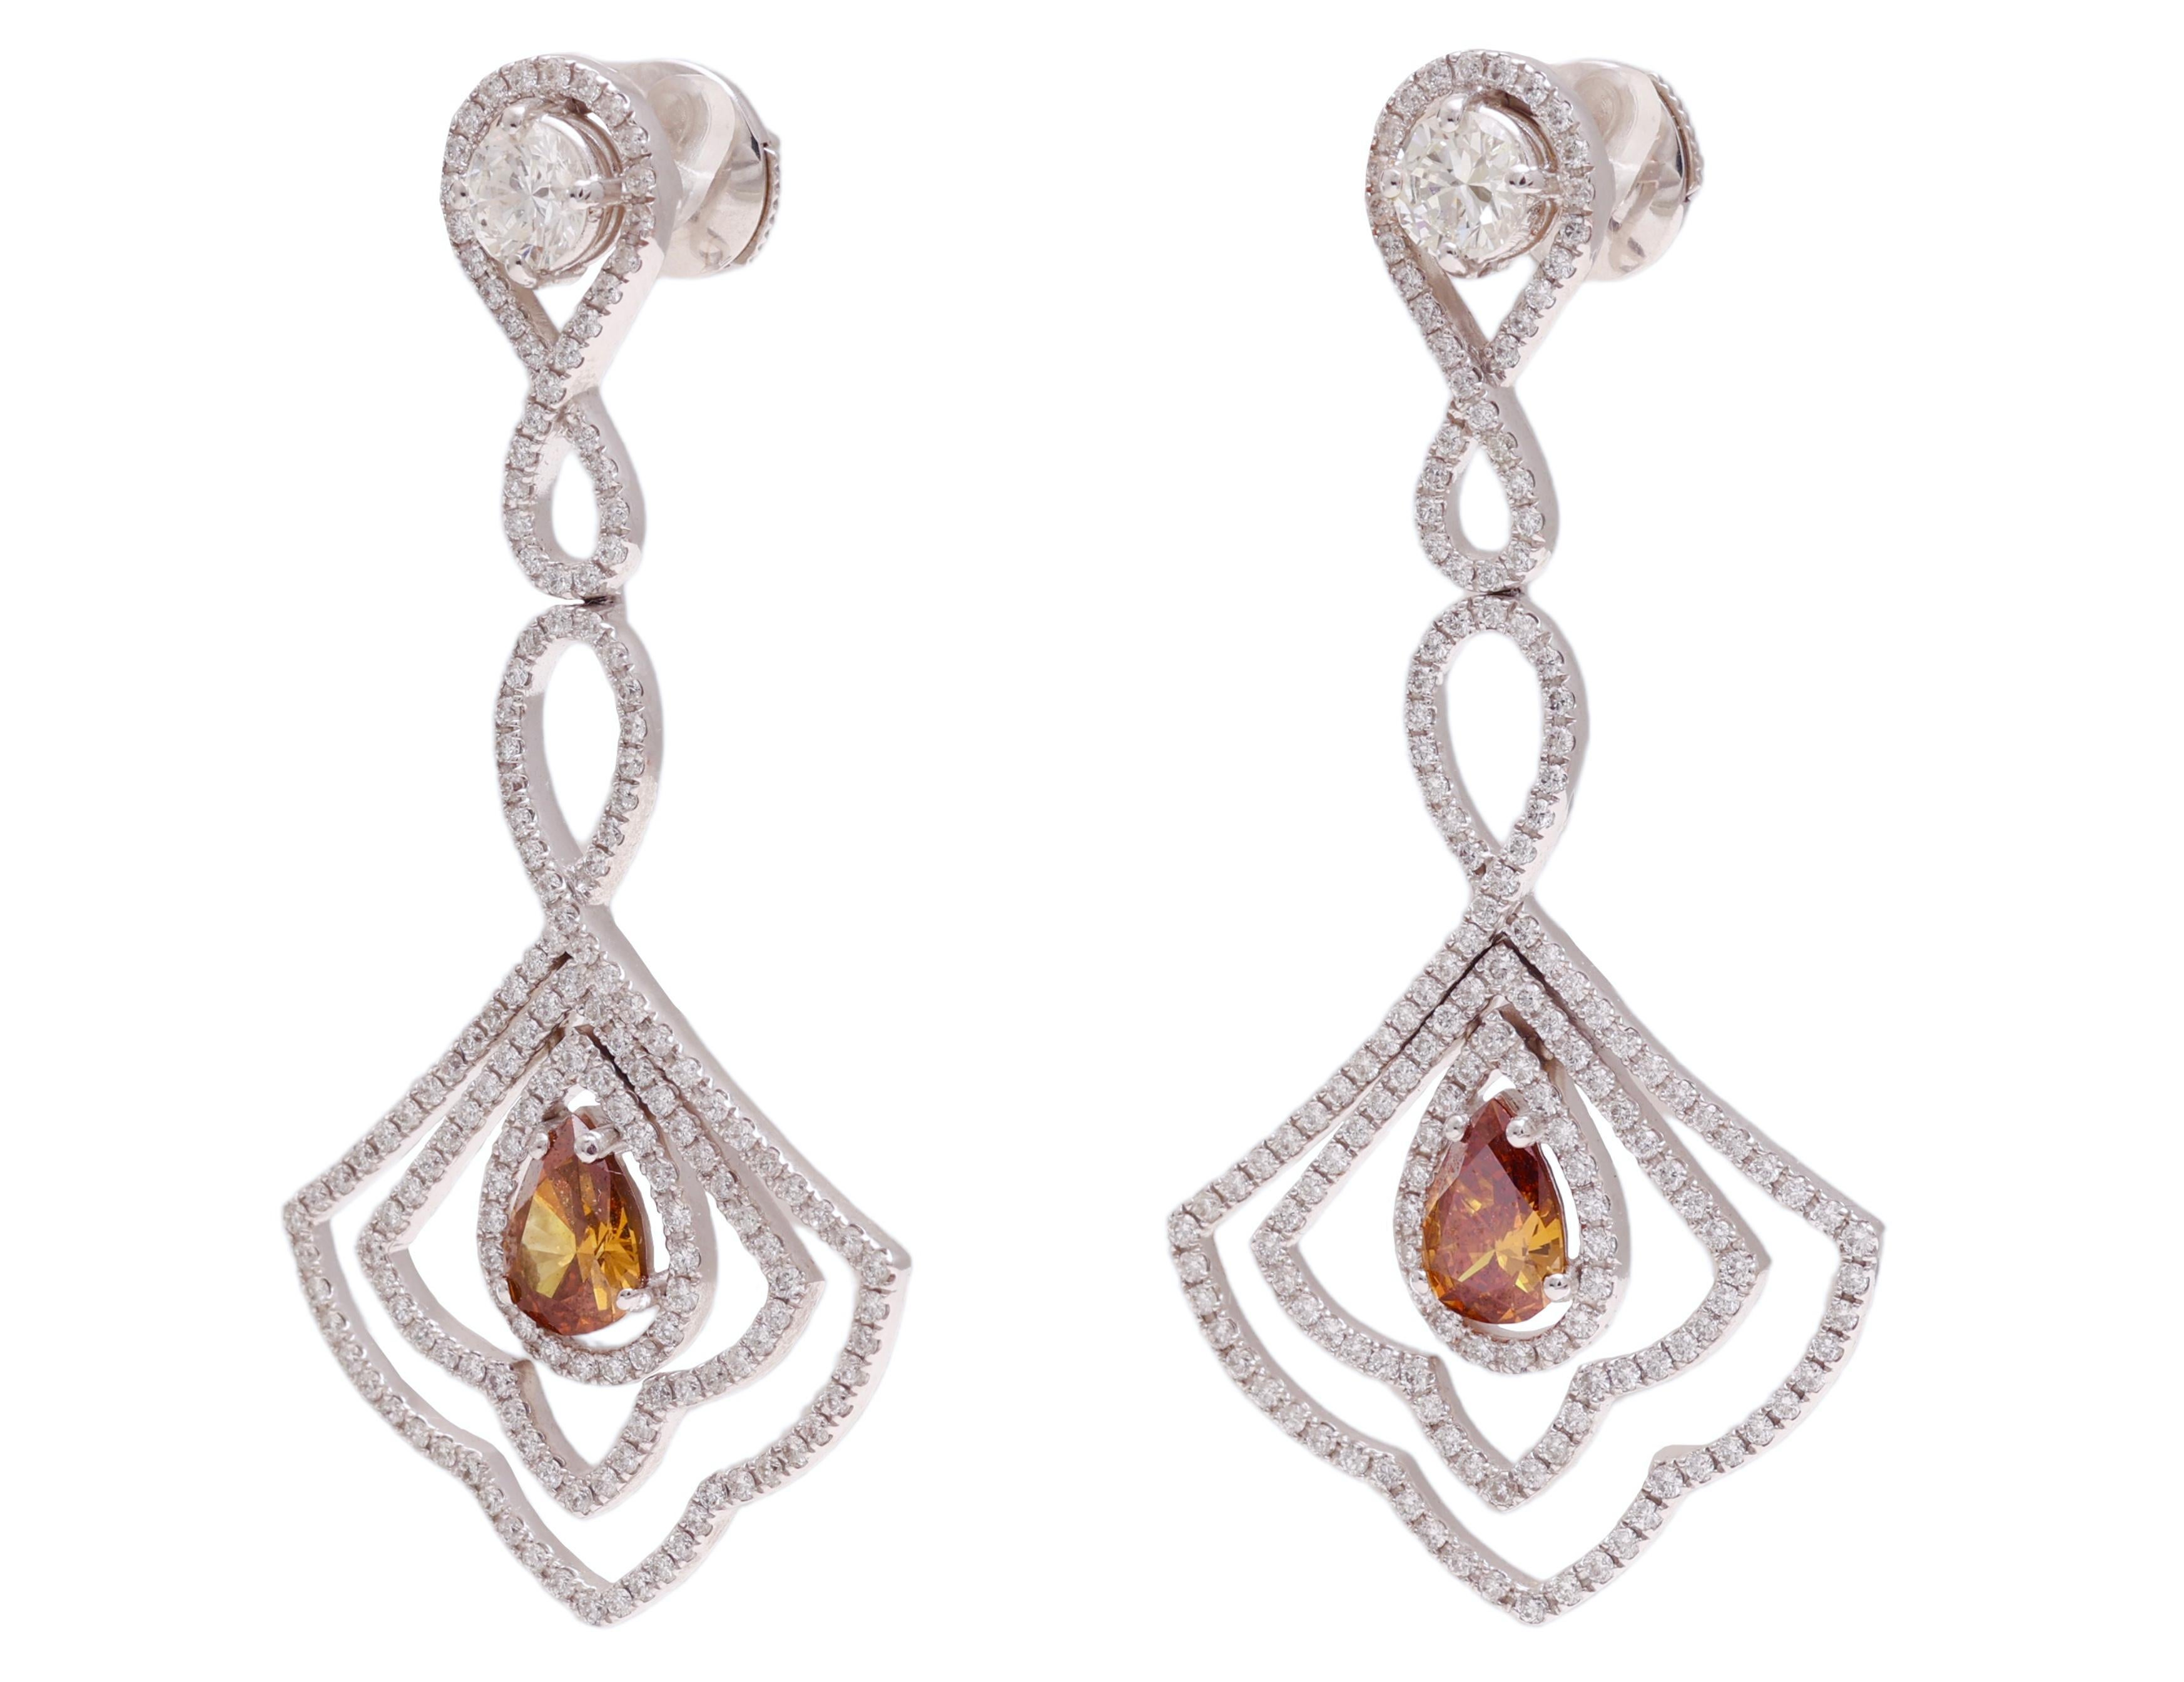 Luxurious 18 kt. White Gold Dangle Earrings Set With 3.6 ct. White Diamonds and Cognac Diamonds

Diamonds: 2 large brilliant cut diamond together 0.76 ct. , small brilliant cut diamonds together 1.80 ct.
Pear shaped cognac diamond together 1.04